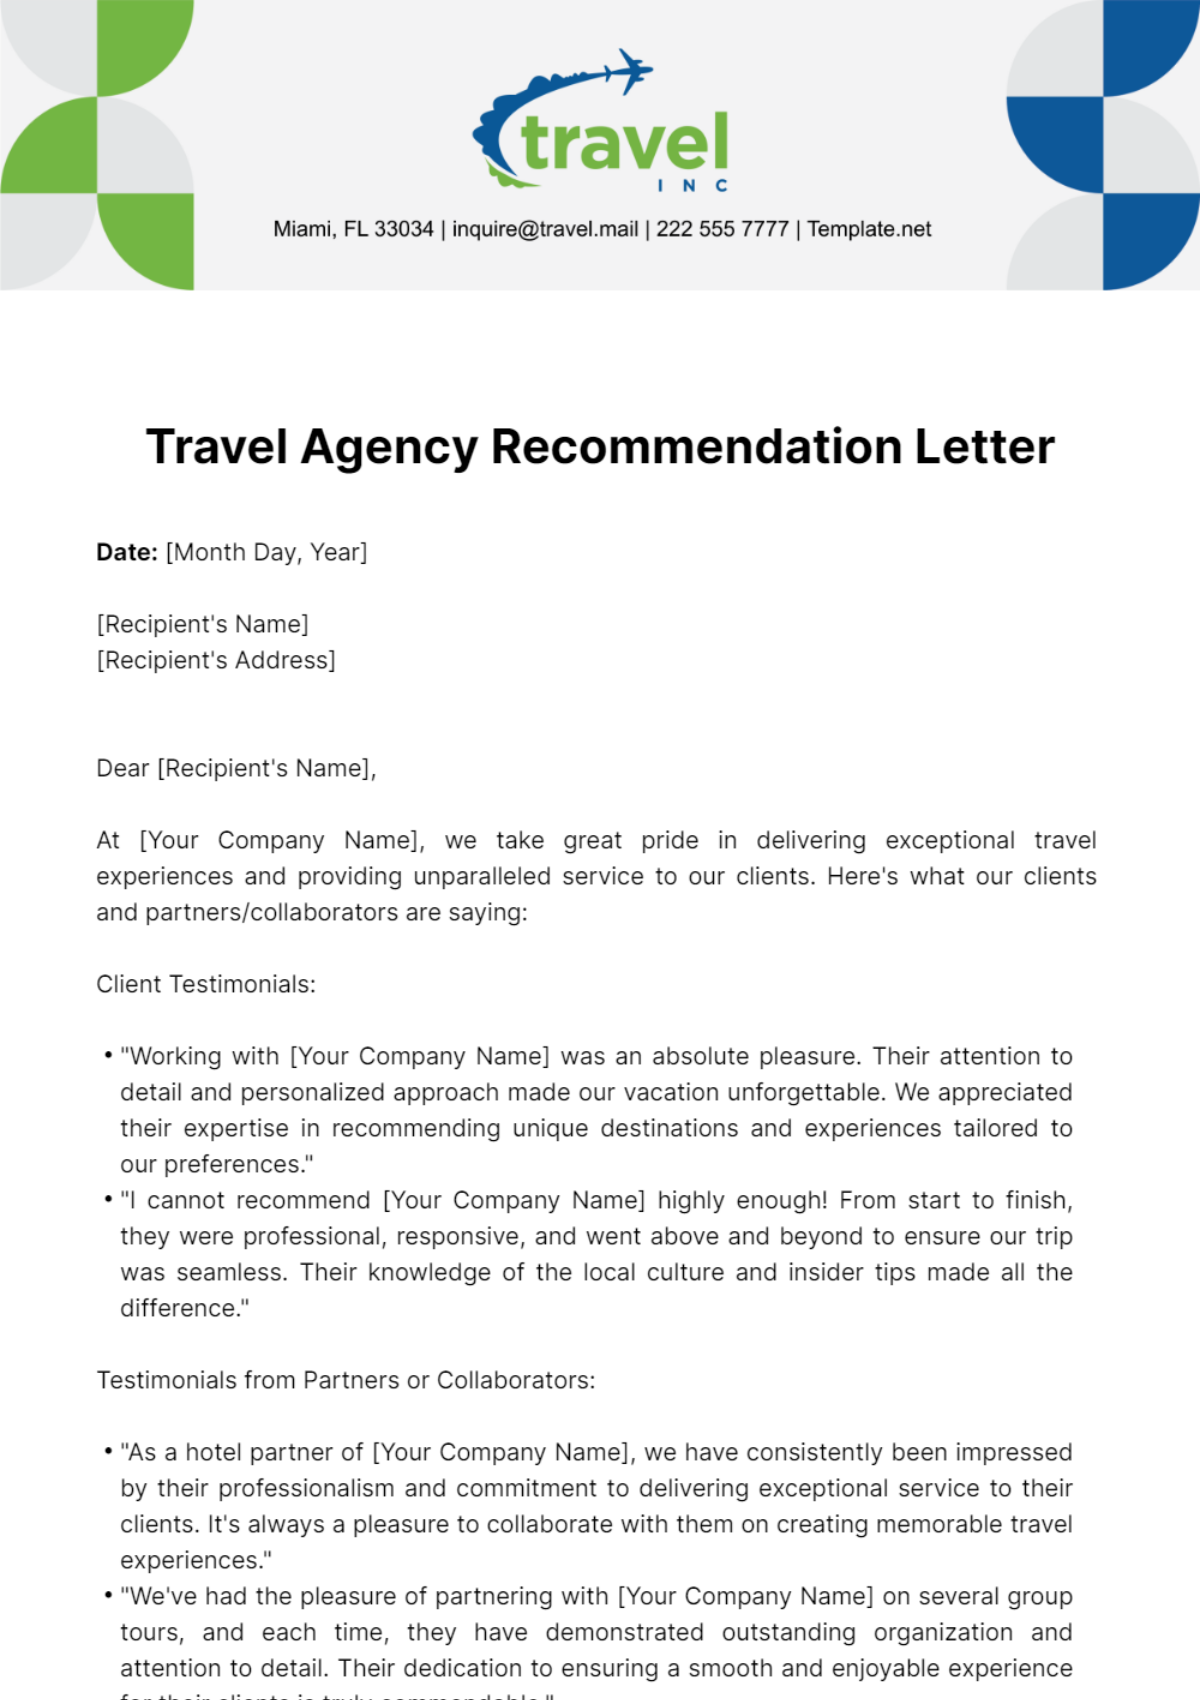 Travel Agency Recommendation Letter Template